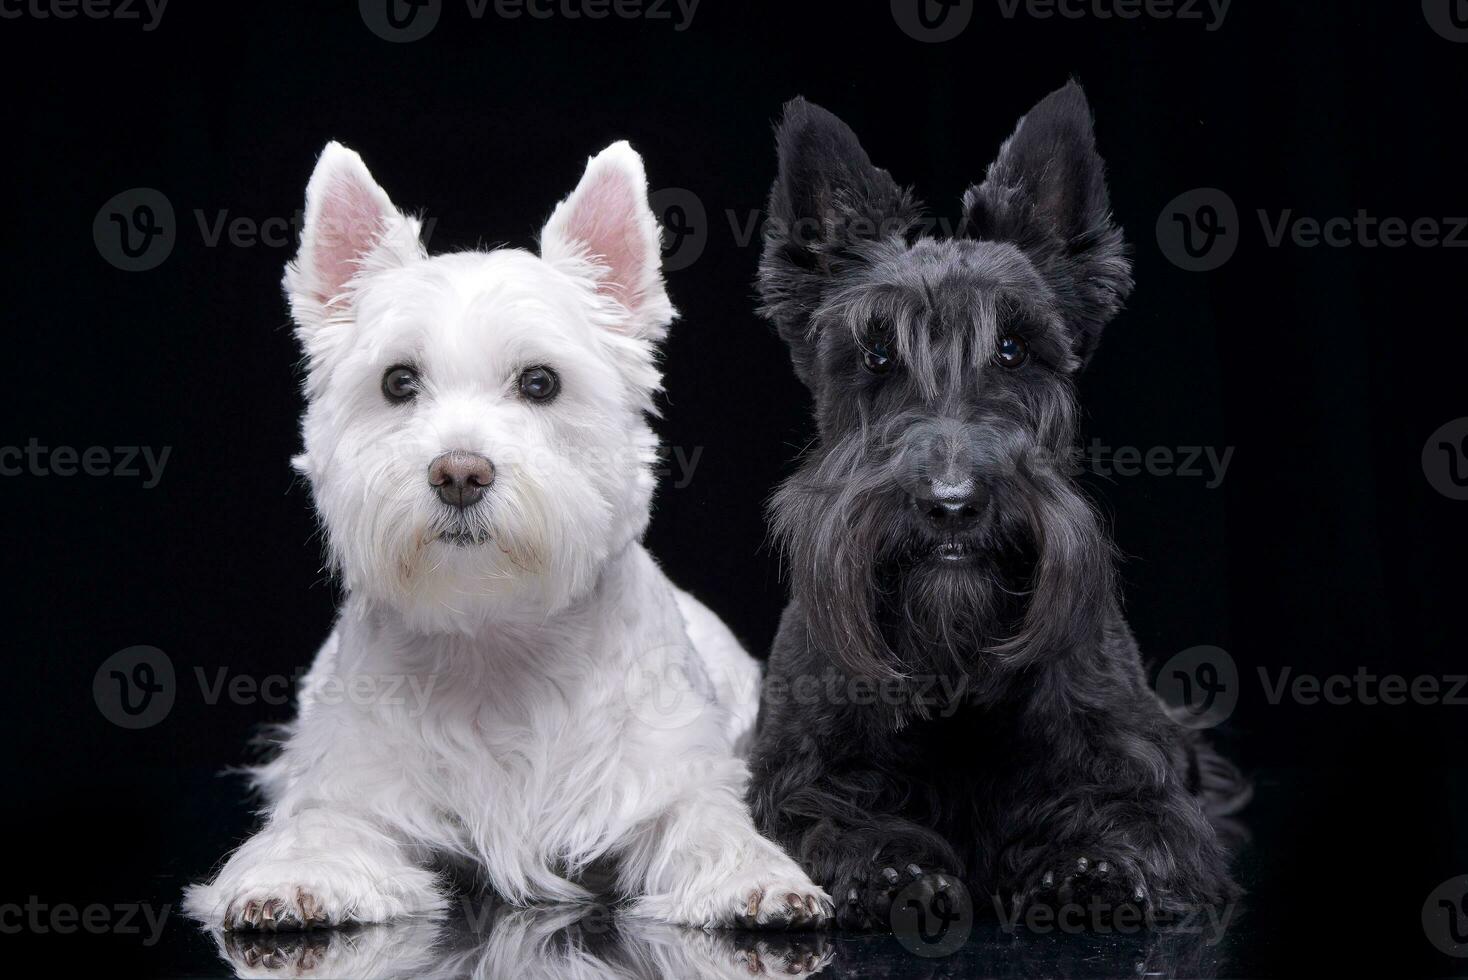 An adorable West Highland White Terrier and a Scottish terrier photo